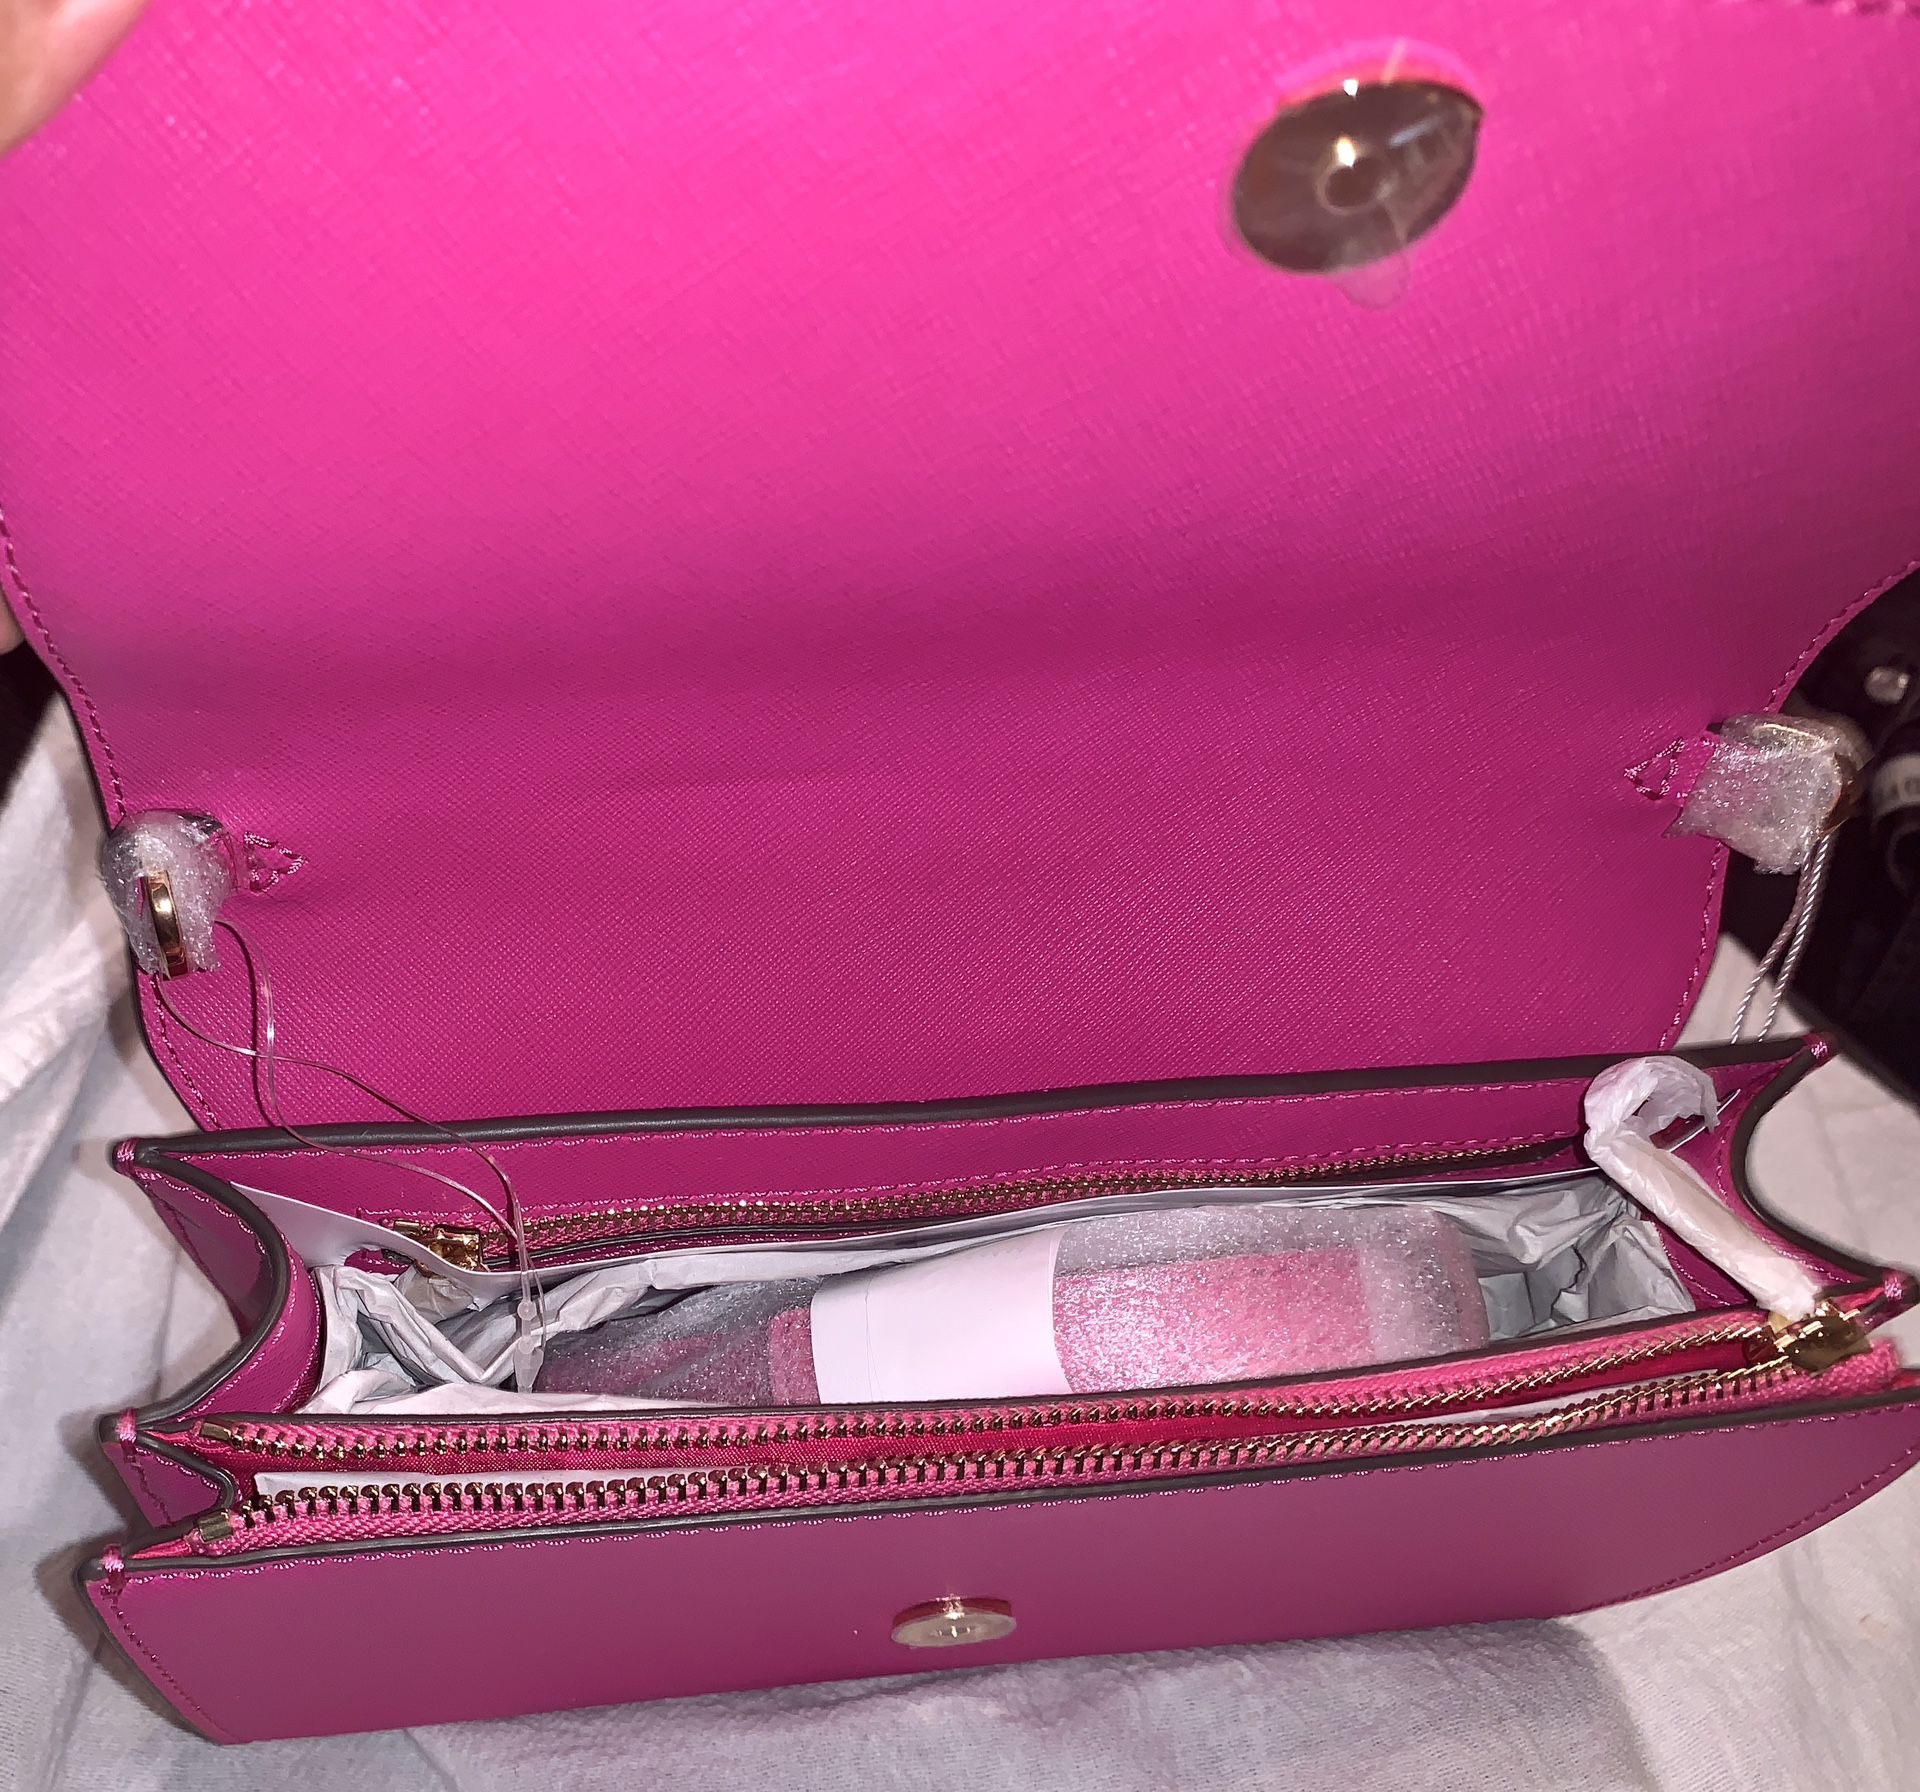 Hot Pink Tory Burch Crossbody/ Clutch Bag for Sale in Atwater, CA